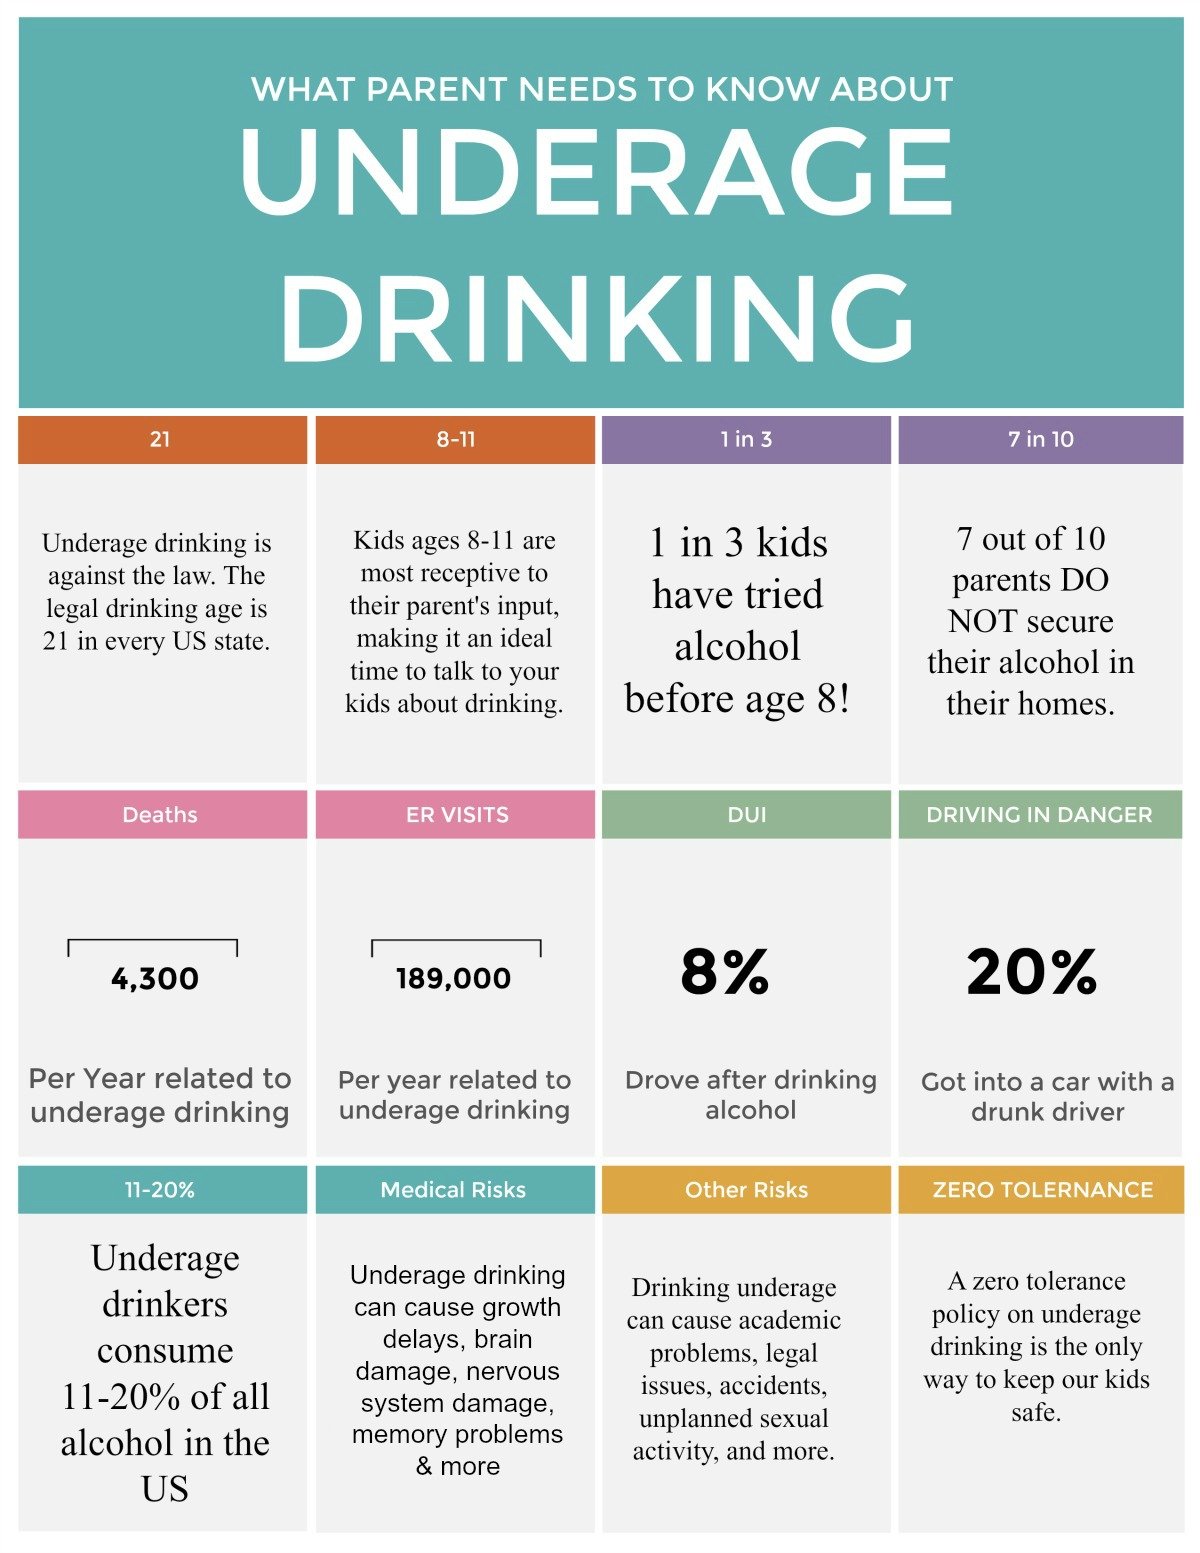 How to Talk to Your Kids About Underage Drinking Our